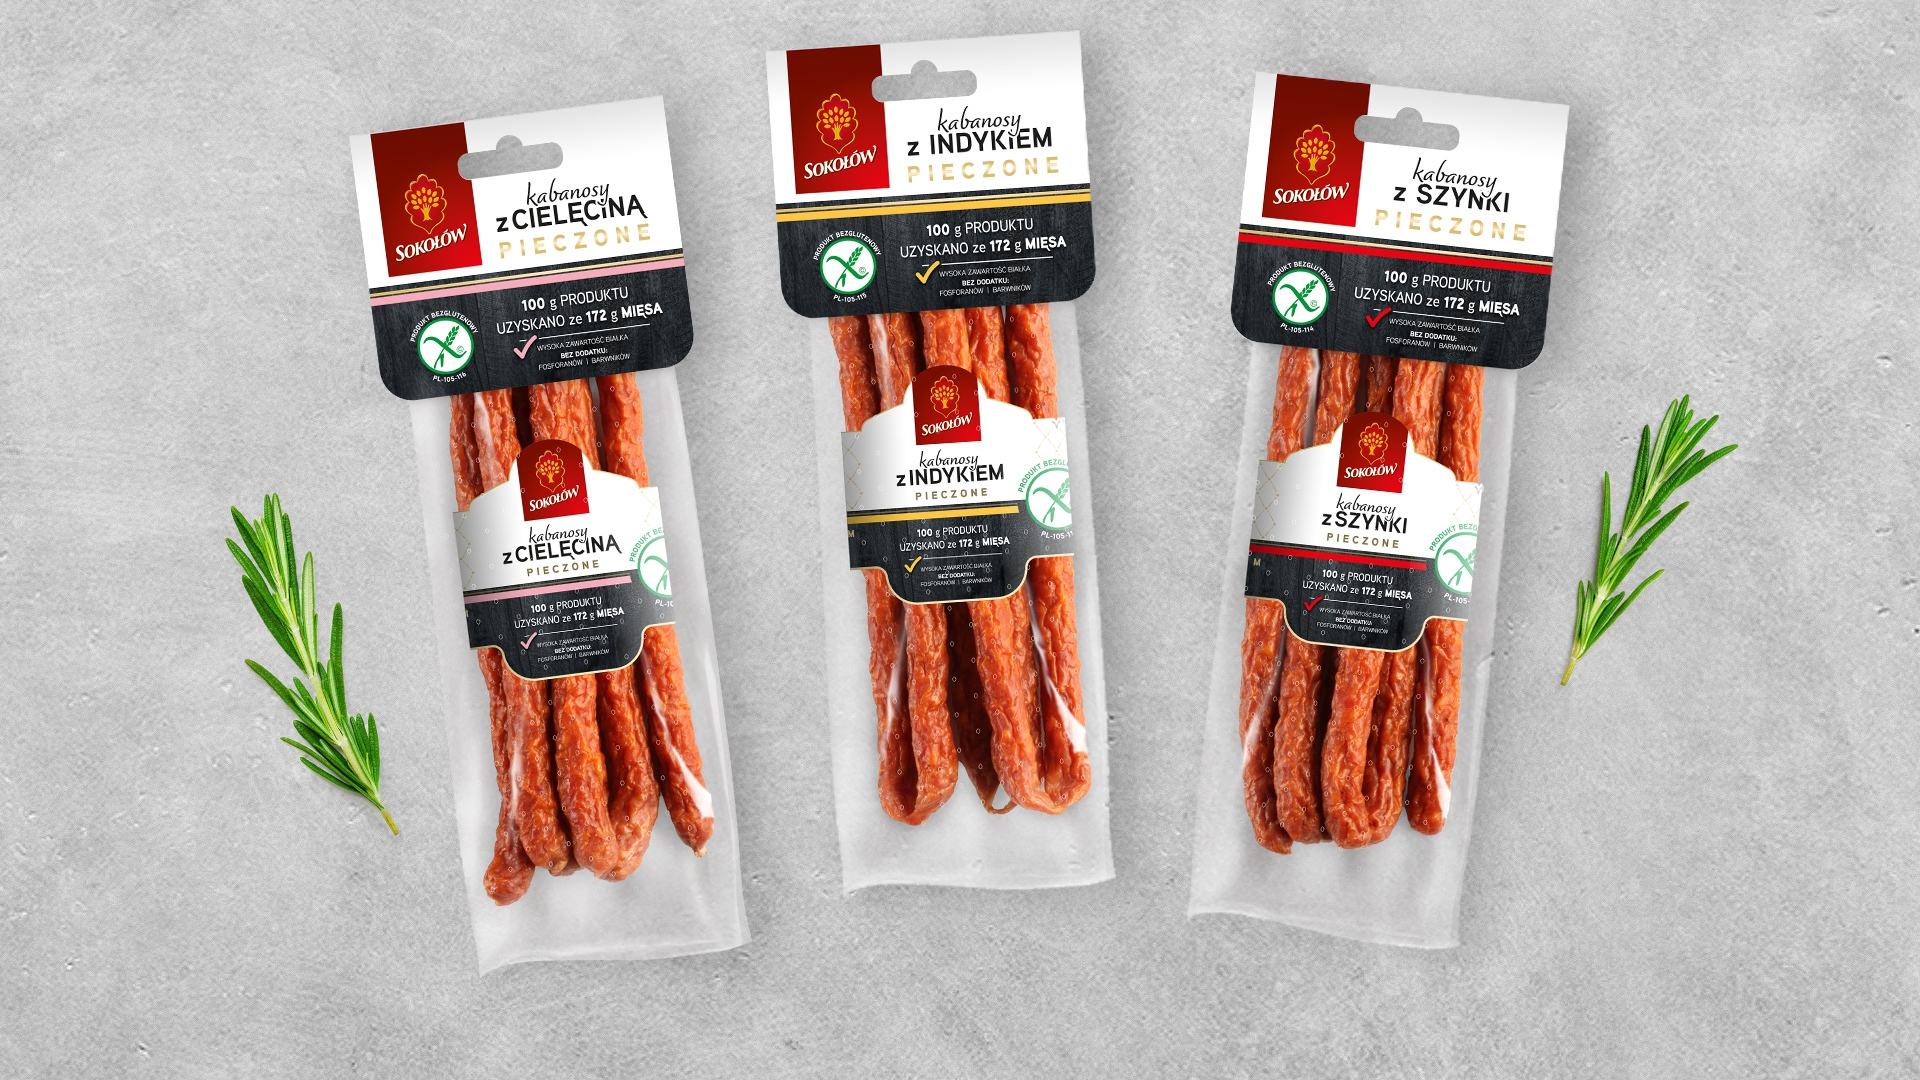 New baked kabanos sausages now in shops